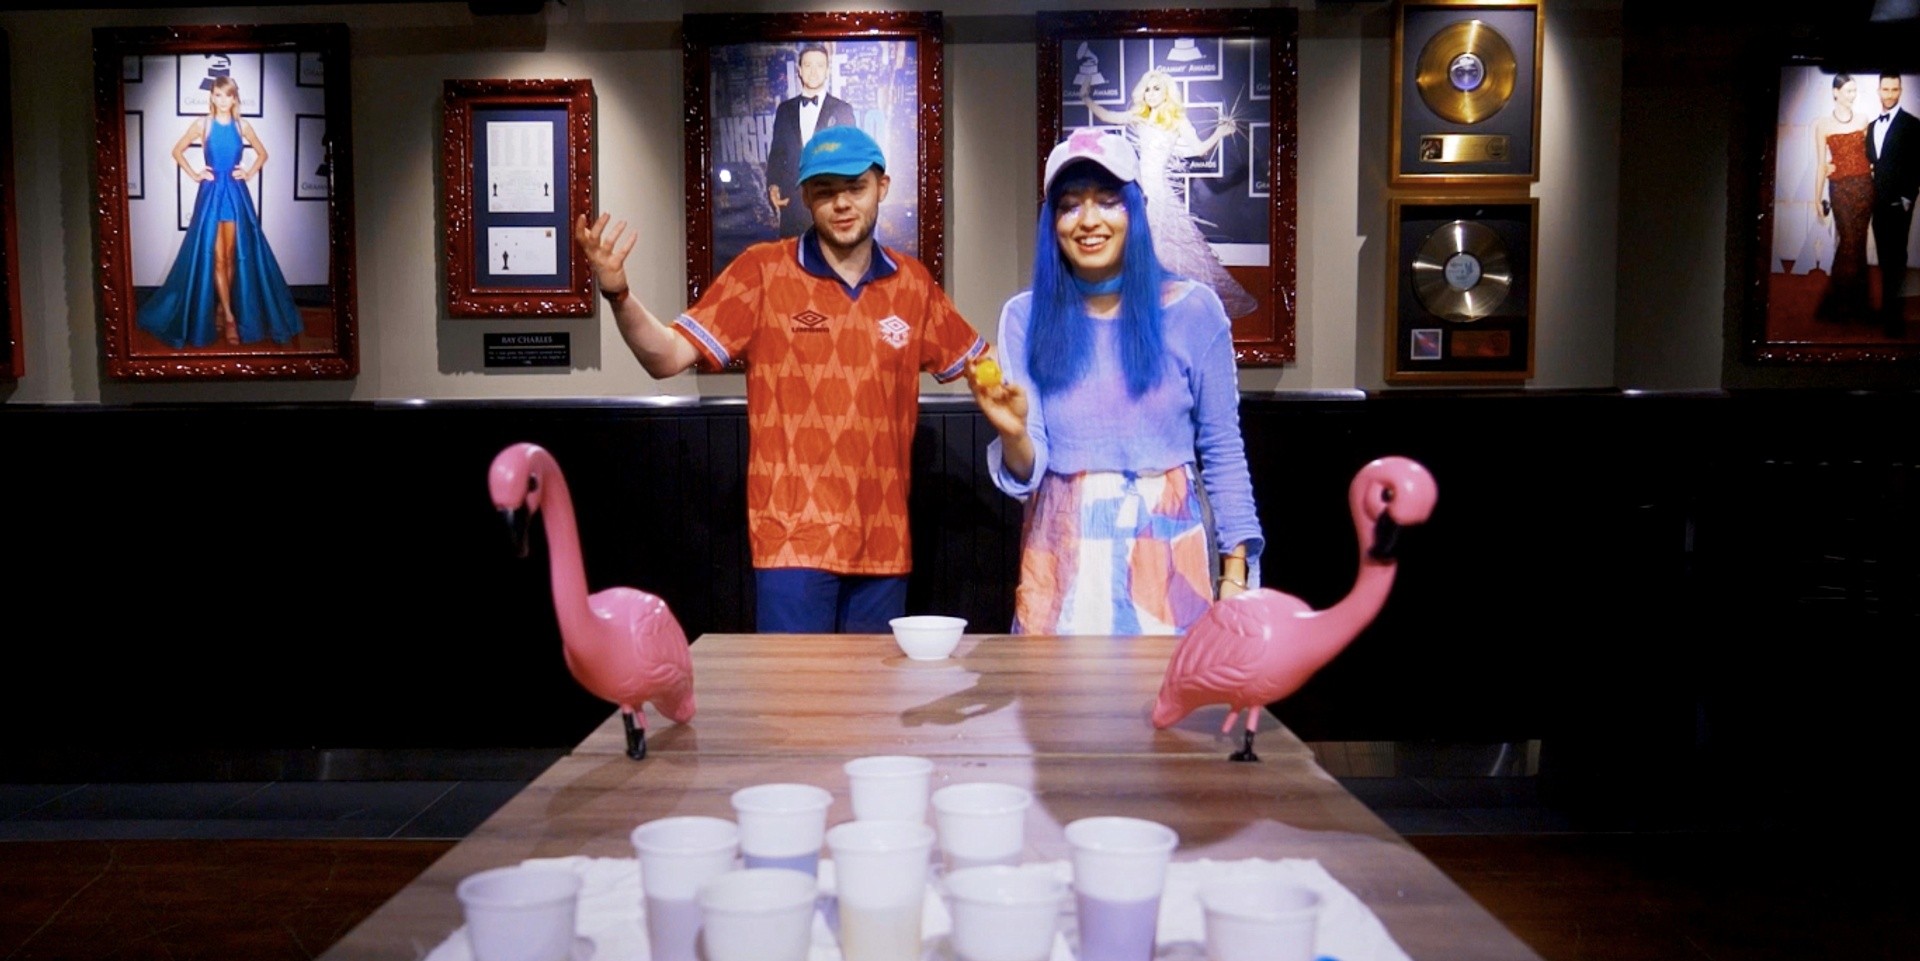 WATCH: Kero Kero Bonito play Teh Pong while sharing about their biggest obstacle so far